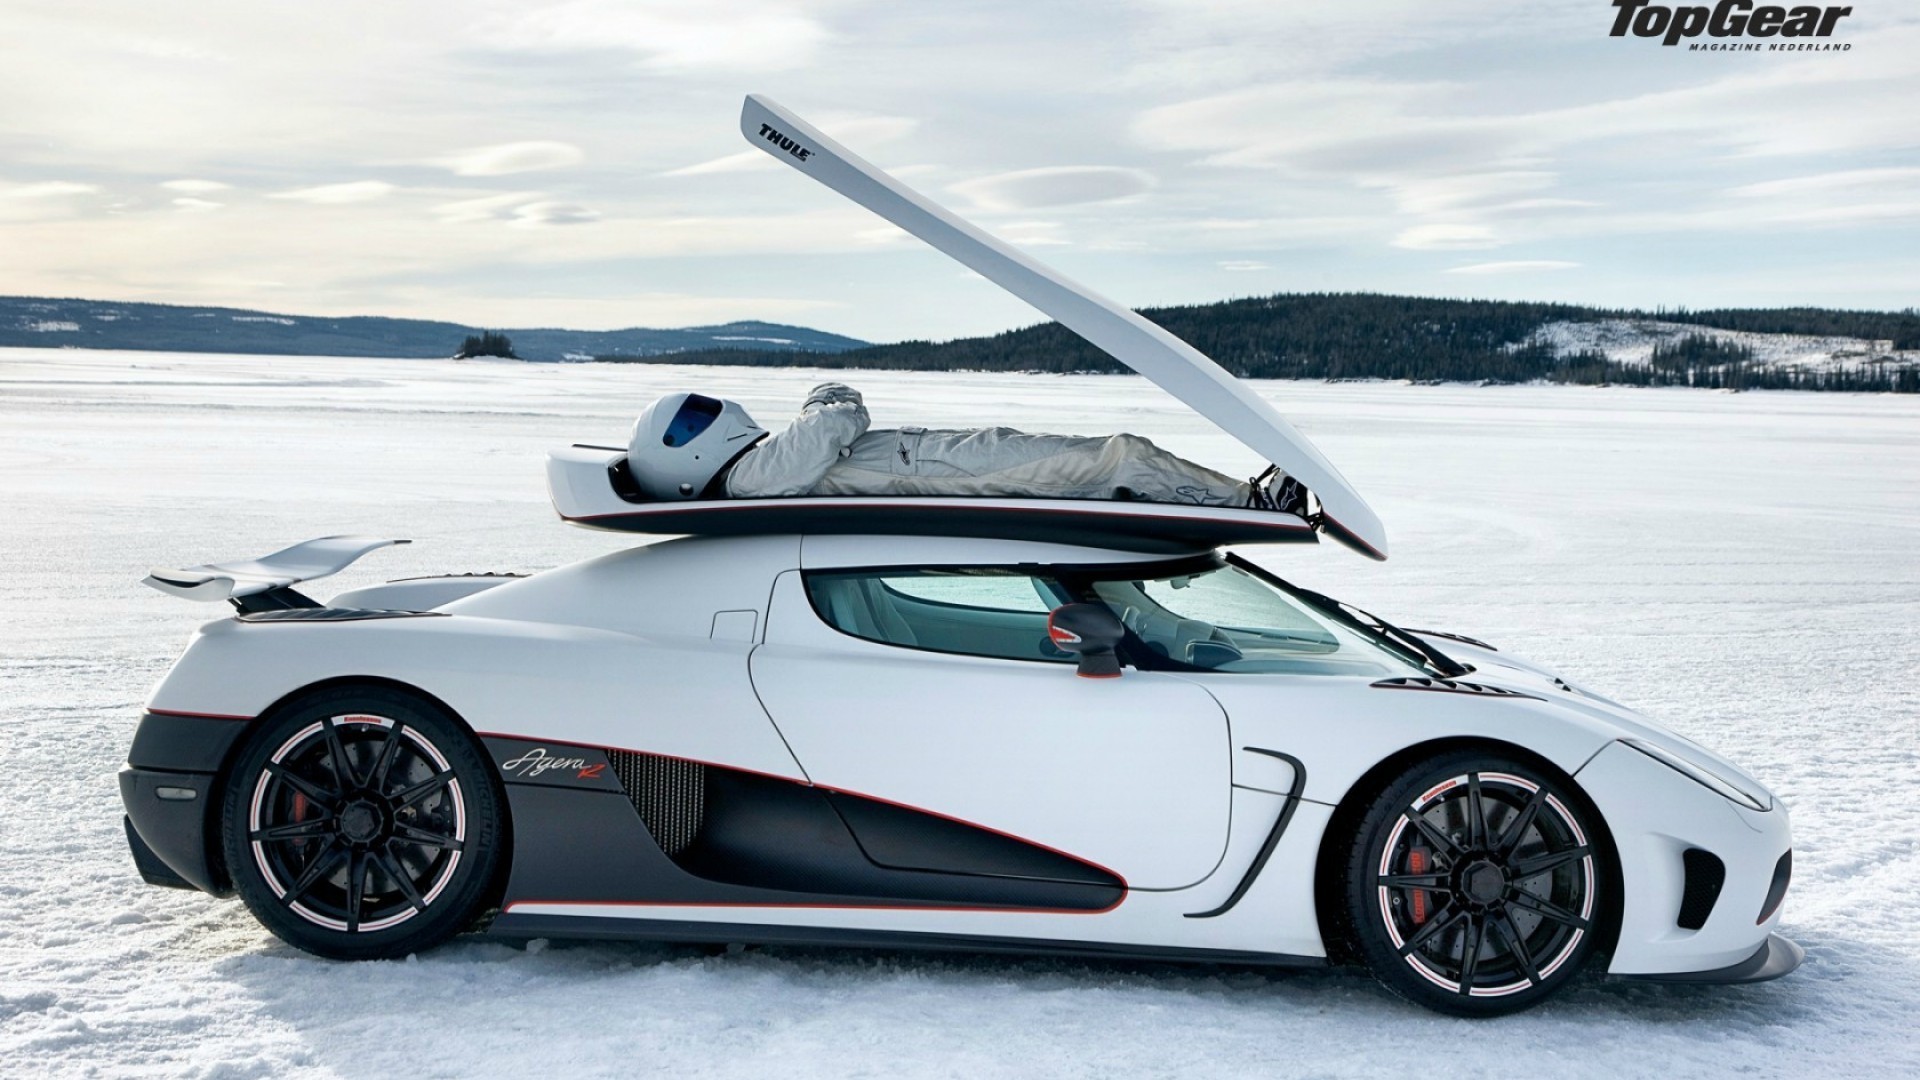 General 1920x1080 car snow vehicle Koenigsegg supercars Koenigsegg Agera The Stig white cars Swedish cars side view Top Gear Hypercar clouds lying down lying on back helmet arms crossed